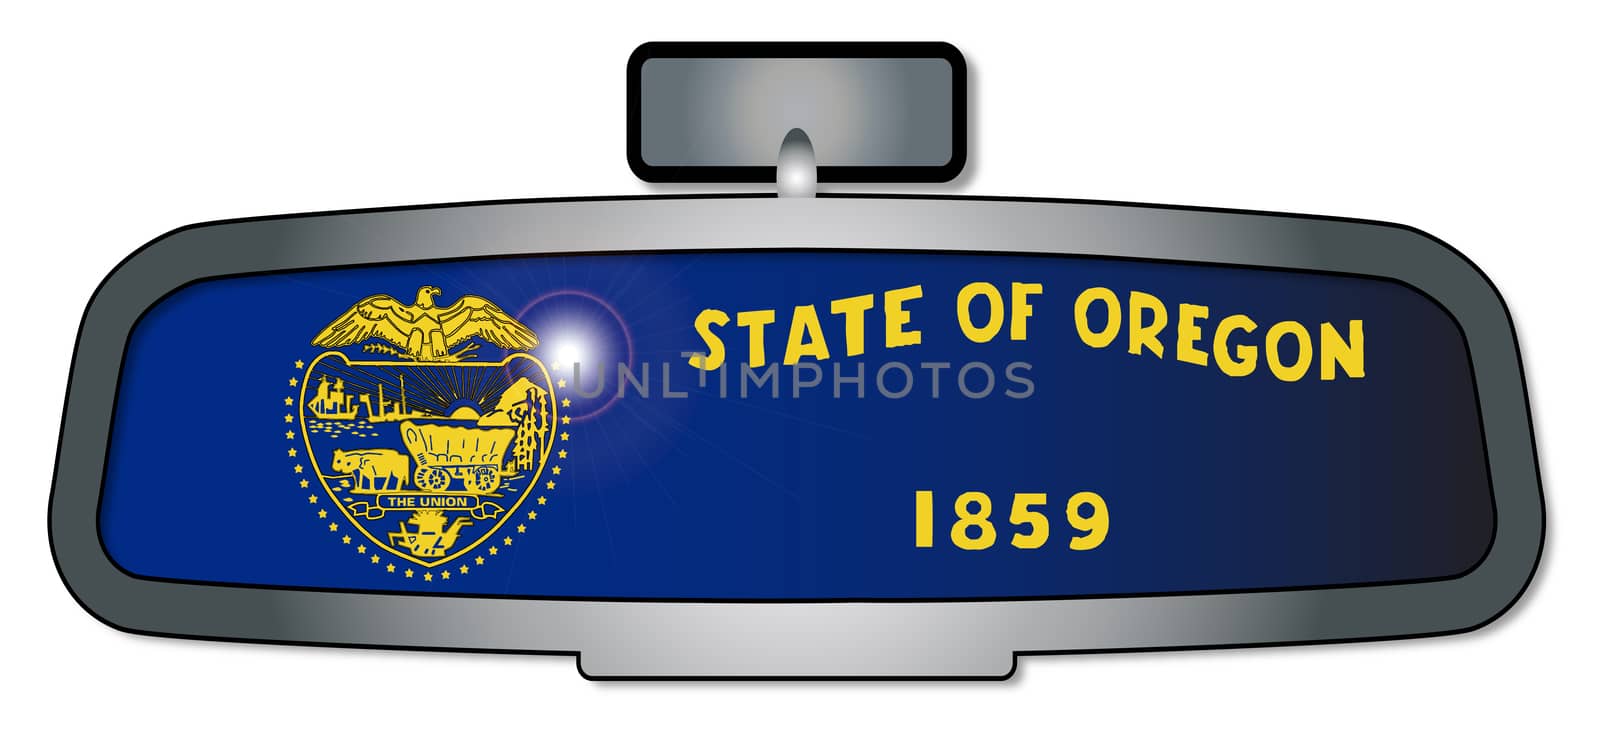 A vehicle rear view mirror with the flag of the state of Oregon